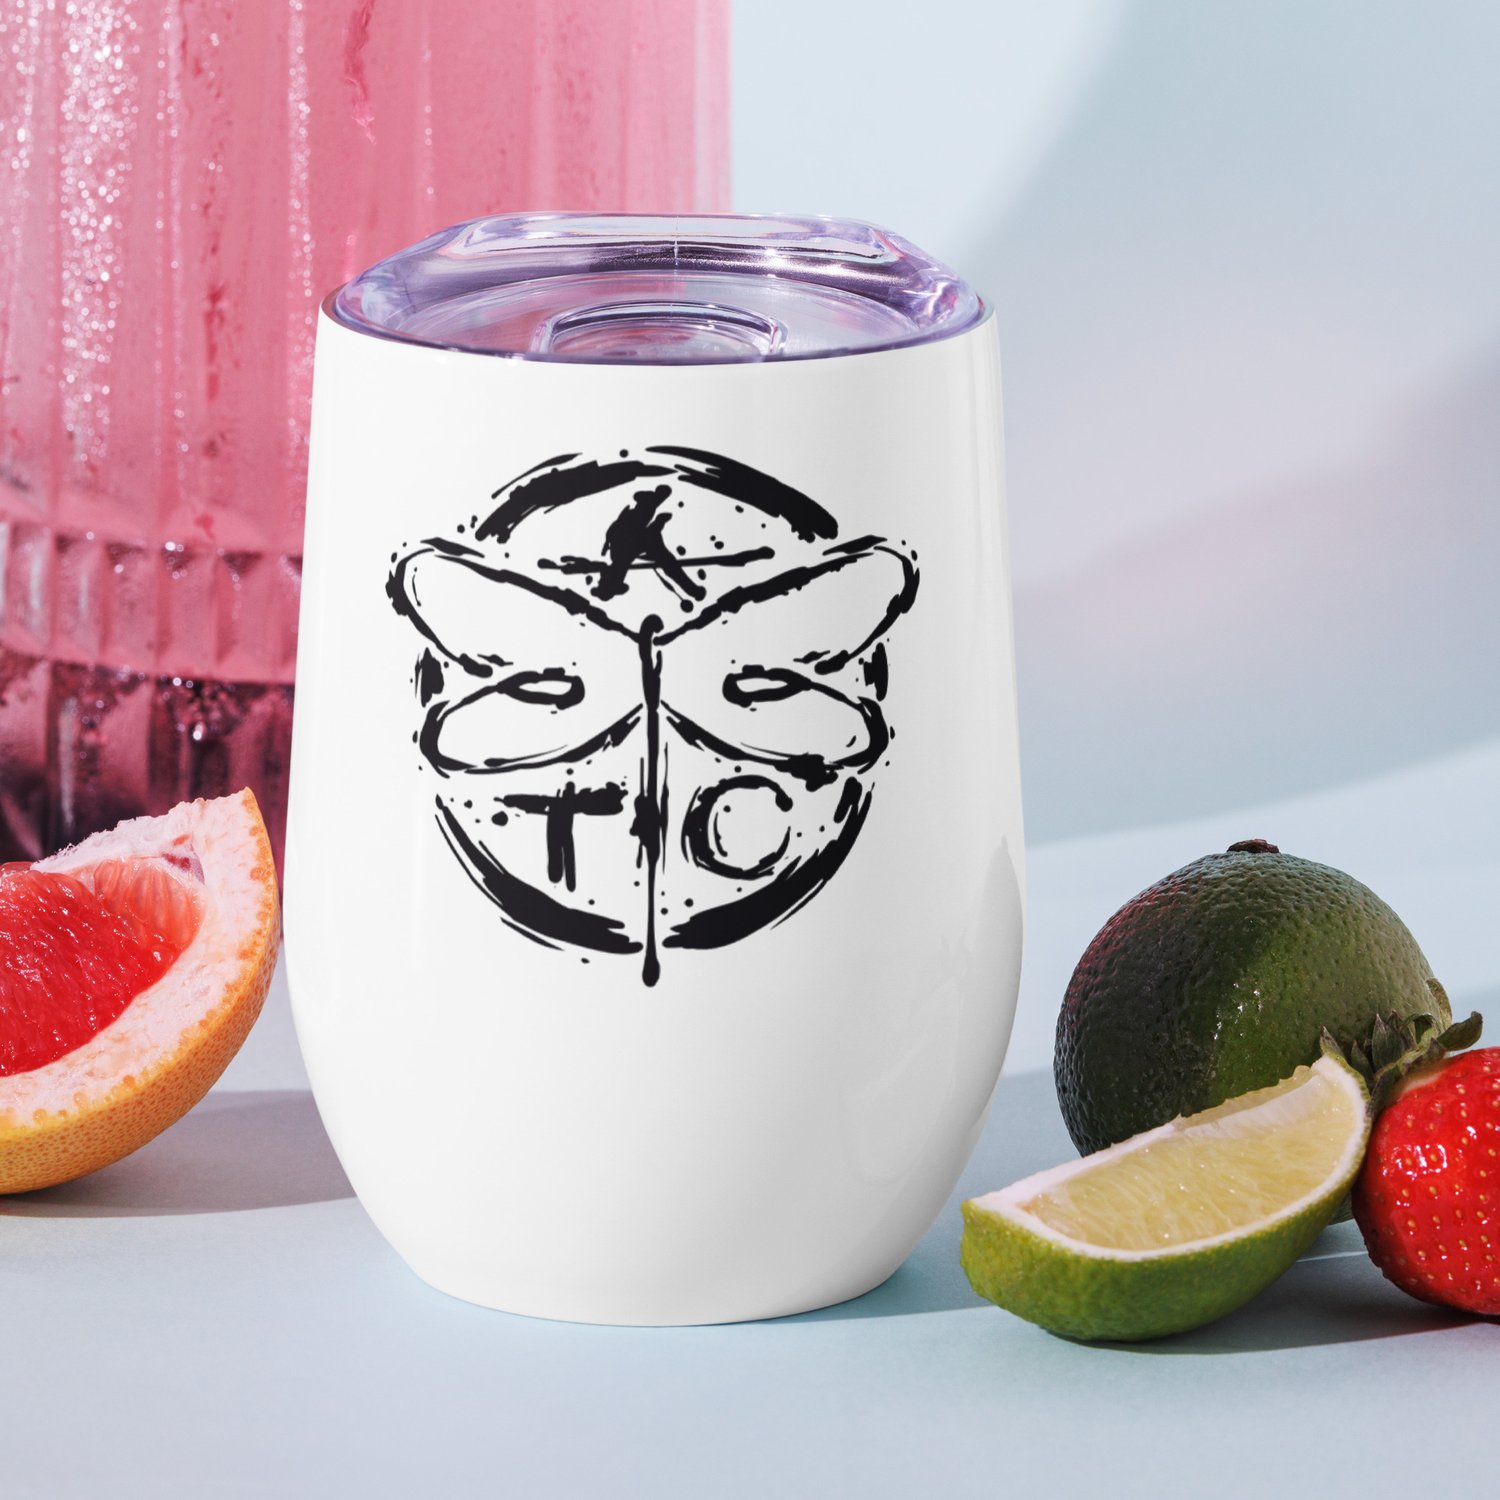 One Among The Crafts - Wine tumbler — one among the crafts